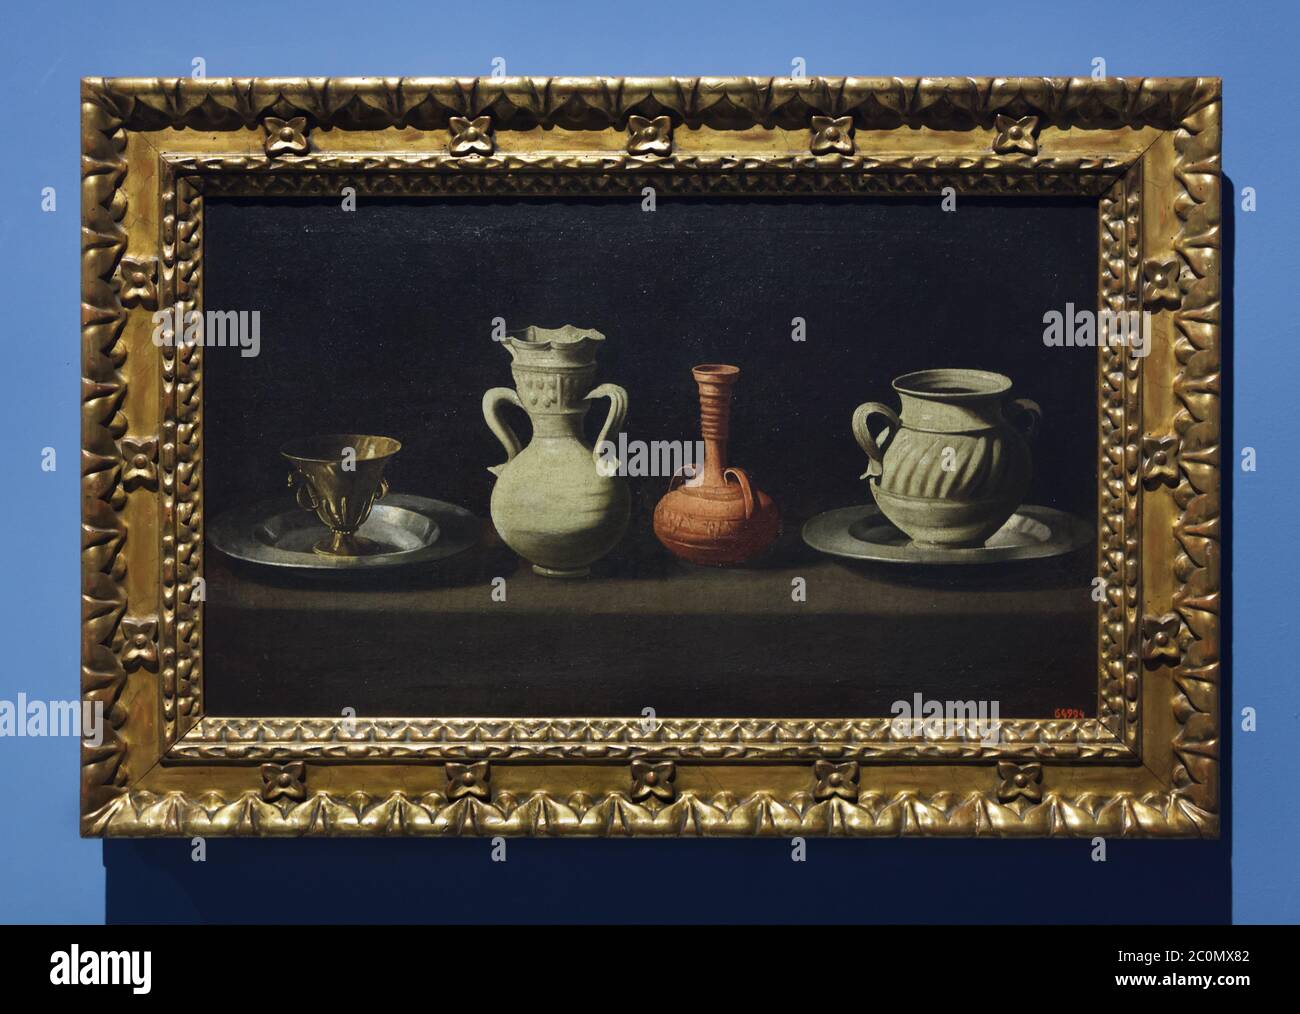 Painting 'Still Life with Vessels' by Spanish painter Francisco de Zurbarán (1650-1660) on display in the National Art Museum of Catalonia (Museu Nacional d'Art de Catalunya) in Barcelona, Catalonia, Spain. Stock Photo